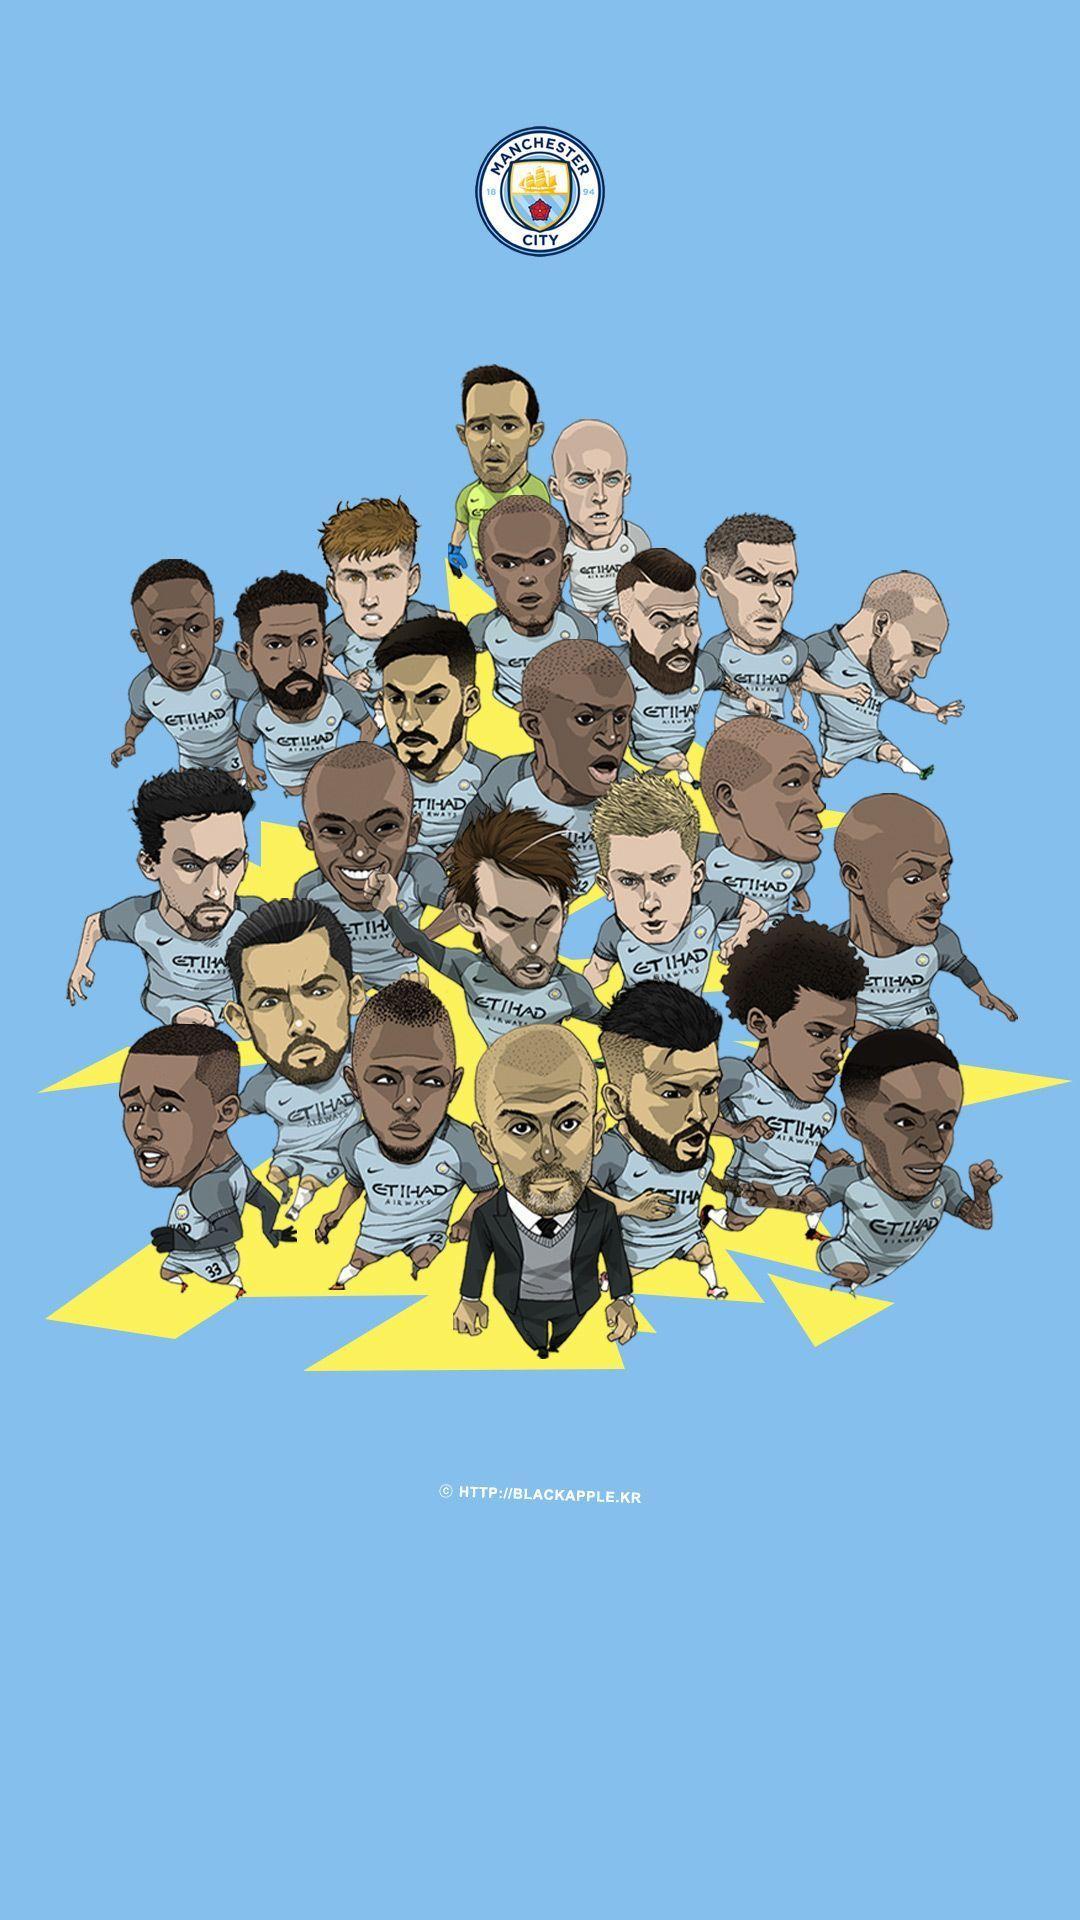 Manchester City Iphone Wallpapers - Top Free Manchester City Iphone